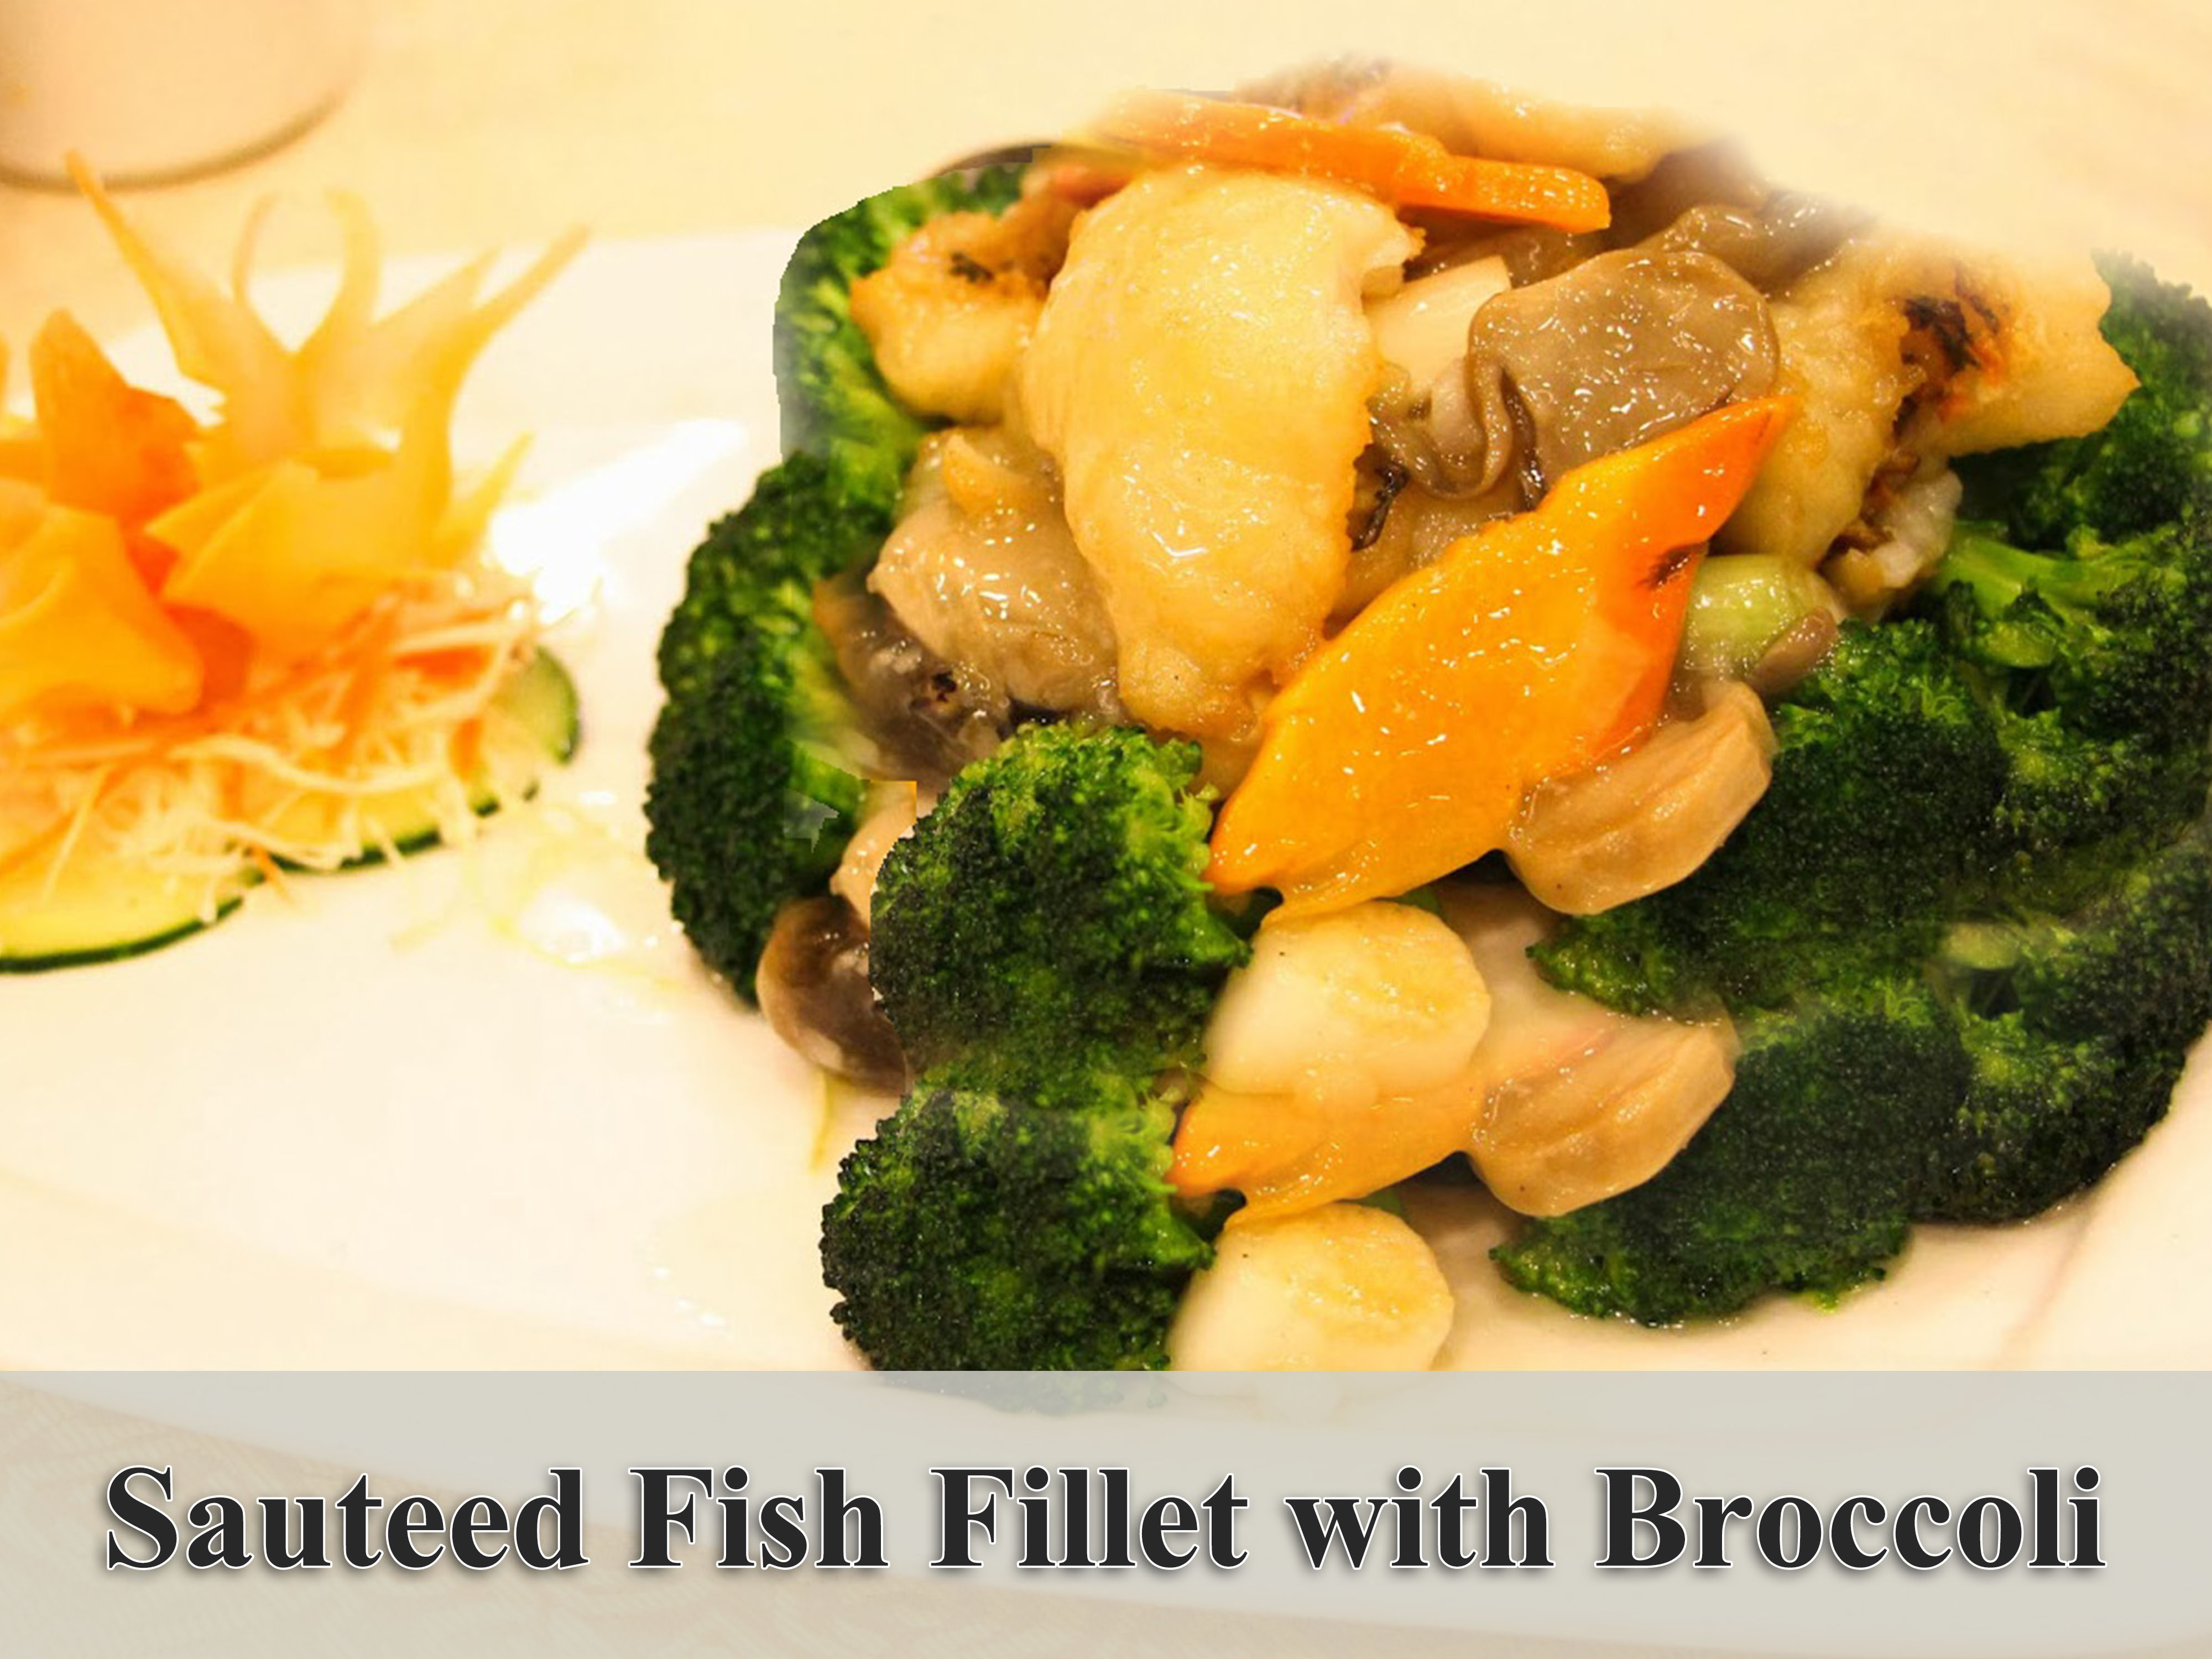 Sauteed Fish Fillet with Broccoli